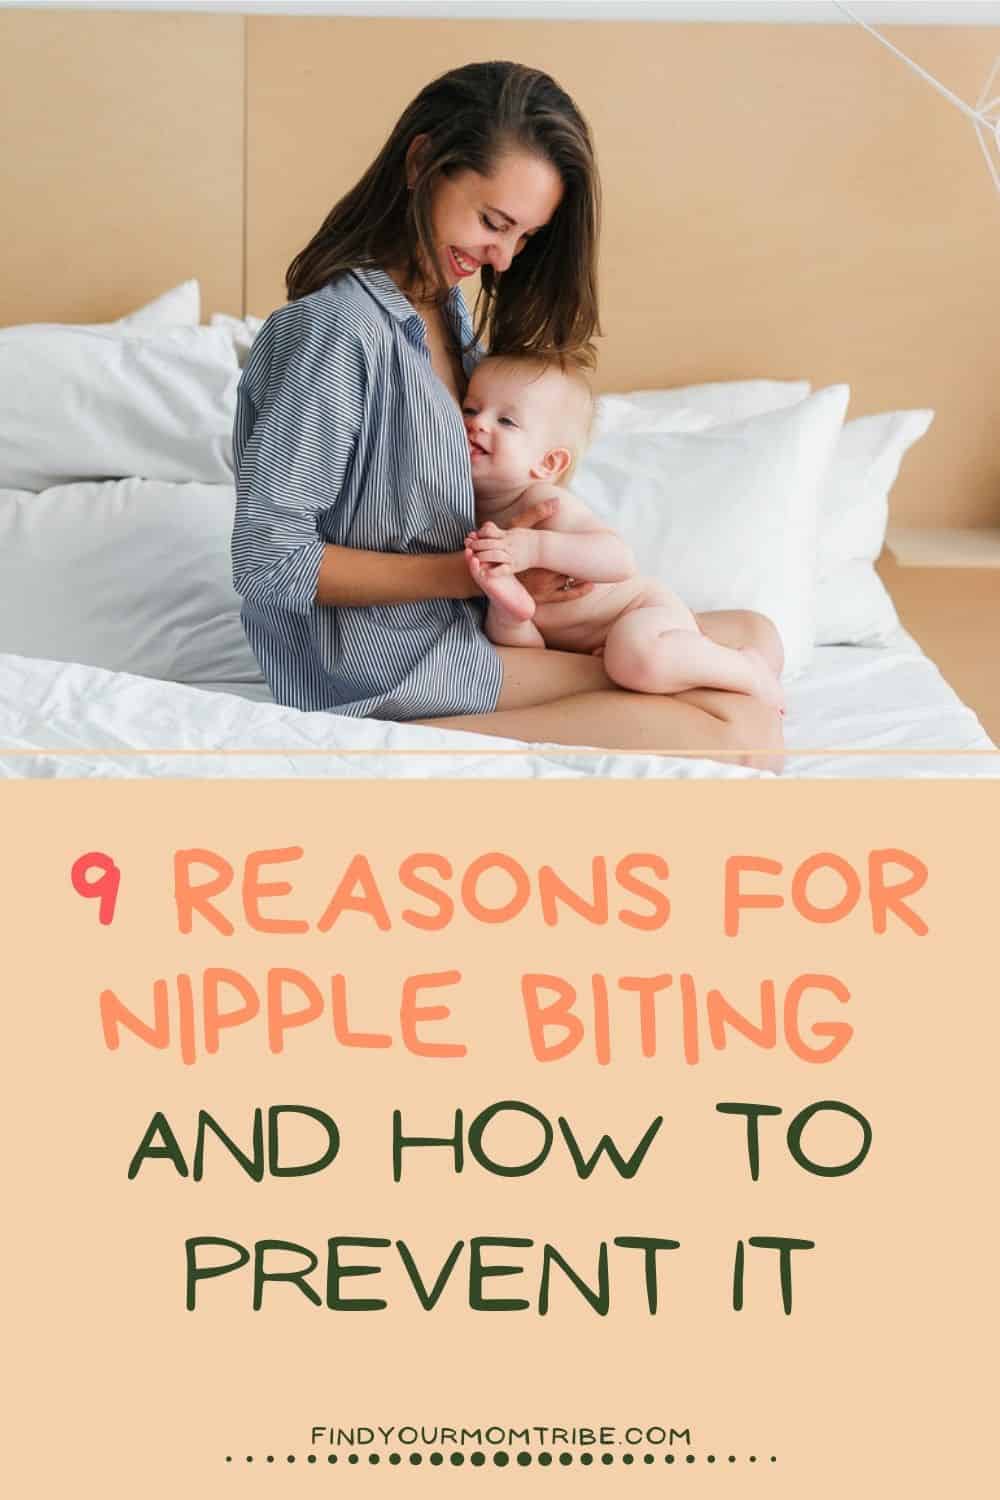 9 Reasons For Nipple Biting And How To Prevent It